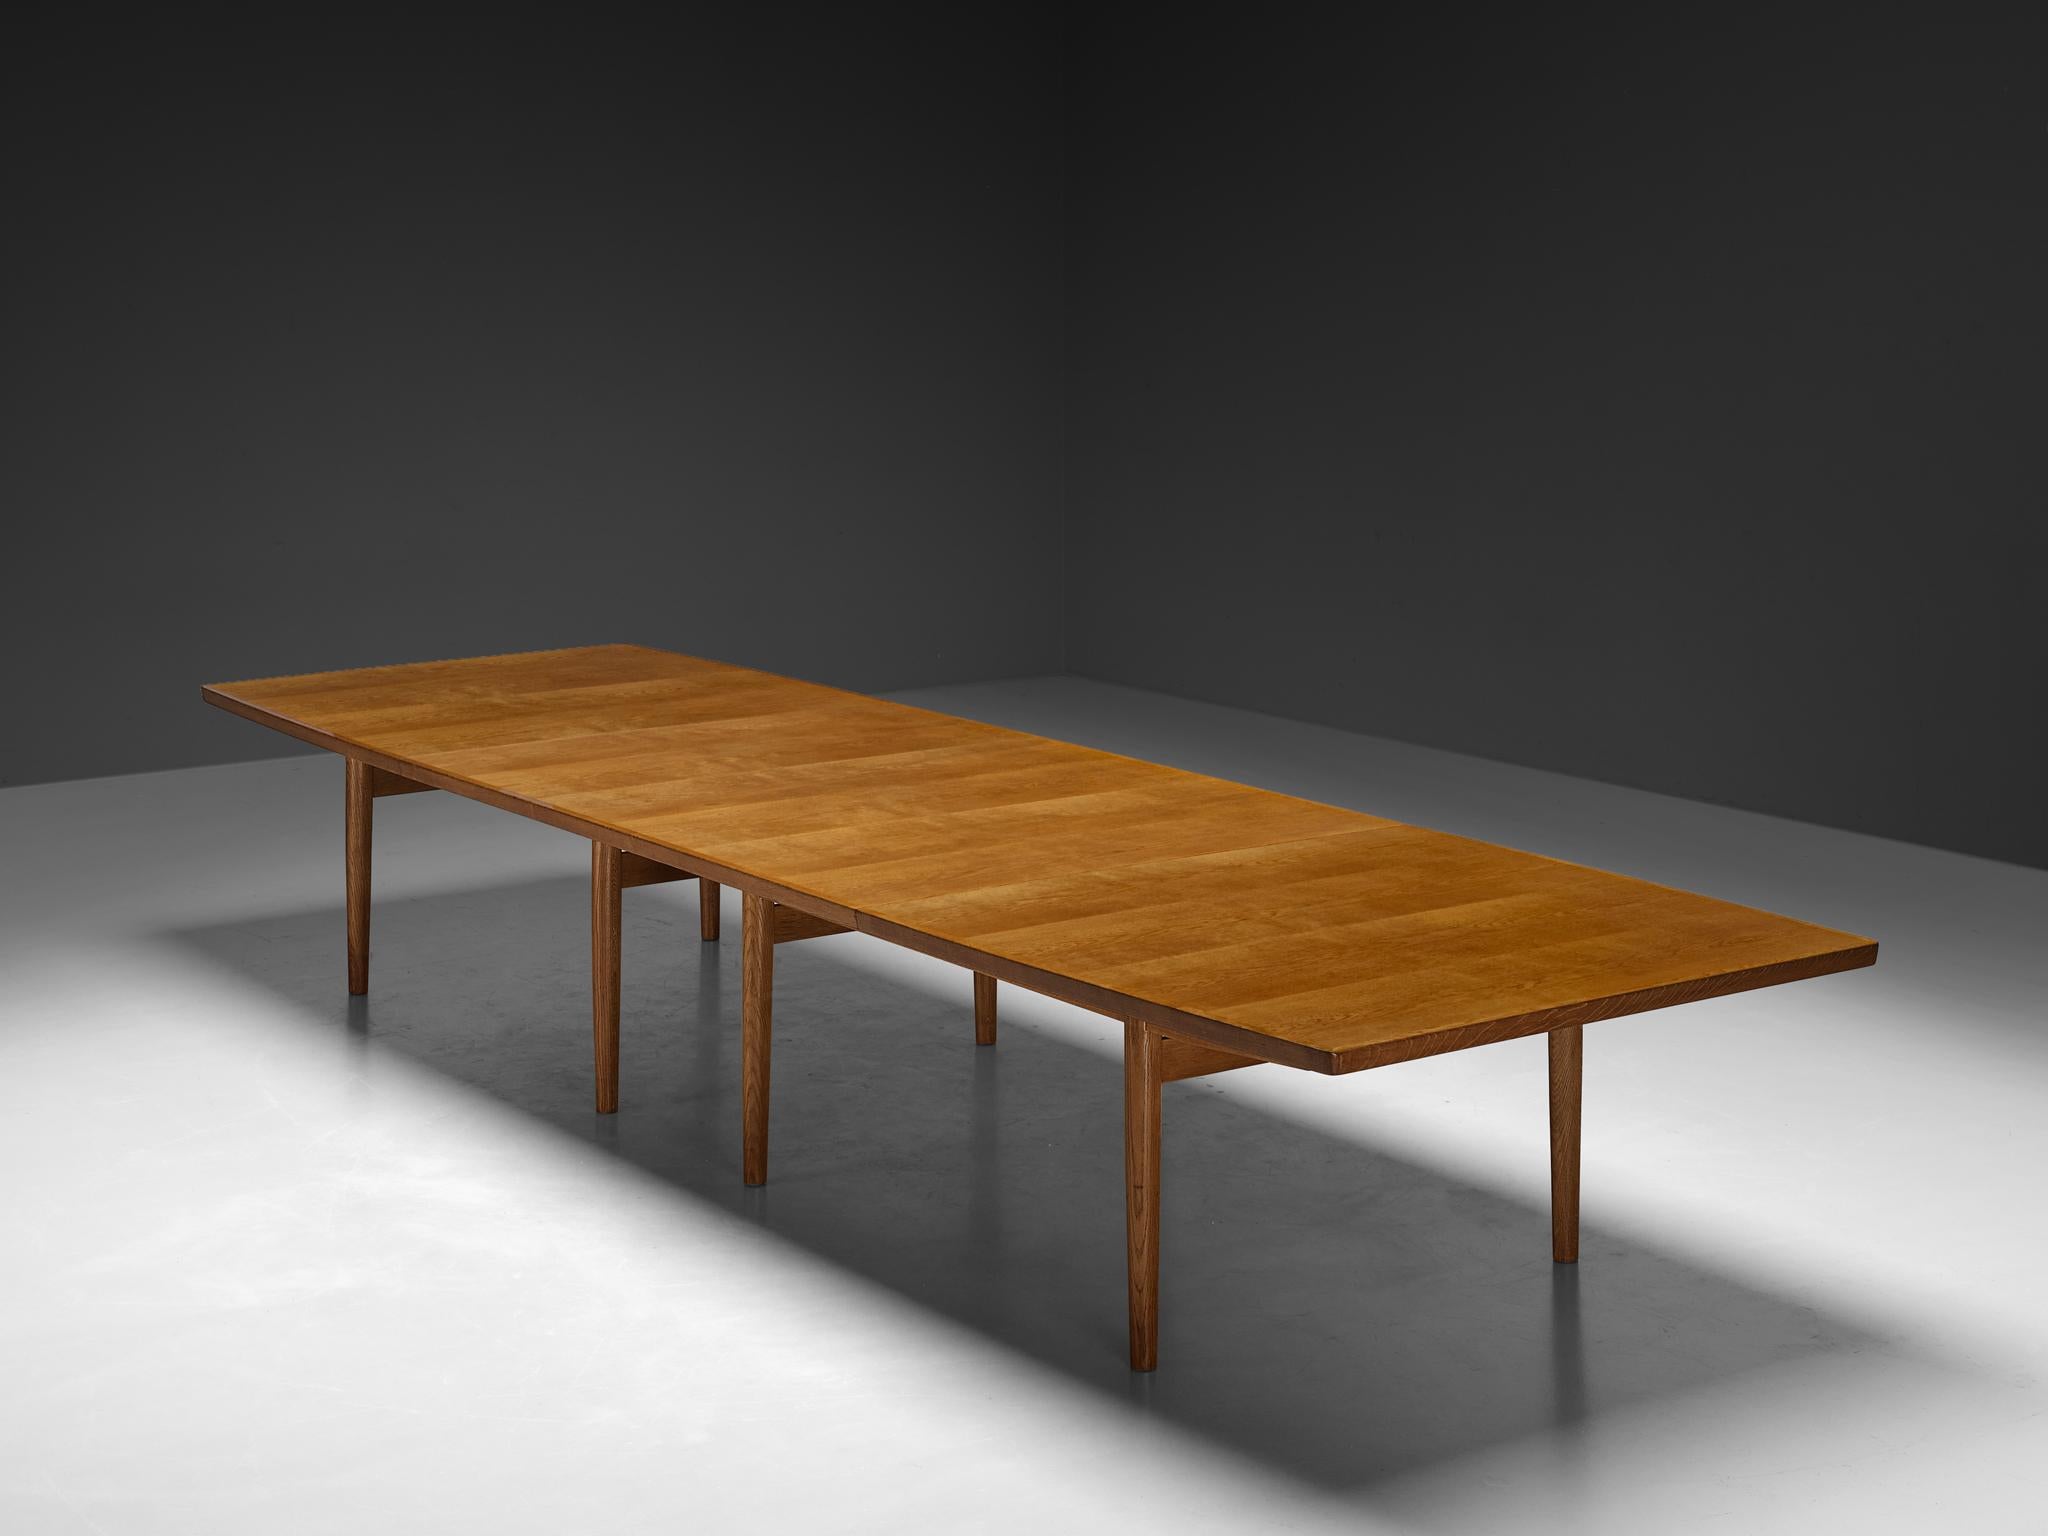 Arne Vodder for Sibast, conference or dining table, oak, Denmark, 1960s

Elegant and simplistic sizable table by Arne Vodder for Sibast. This large conference table has an impressive size with its 16 ft in length. The table consists of a boat shaped